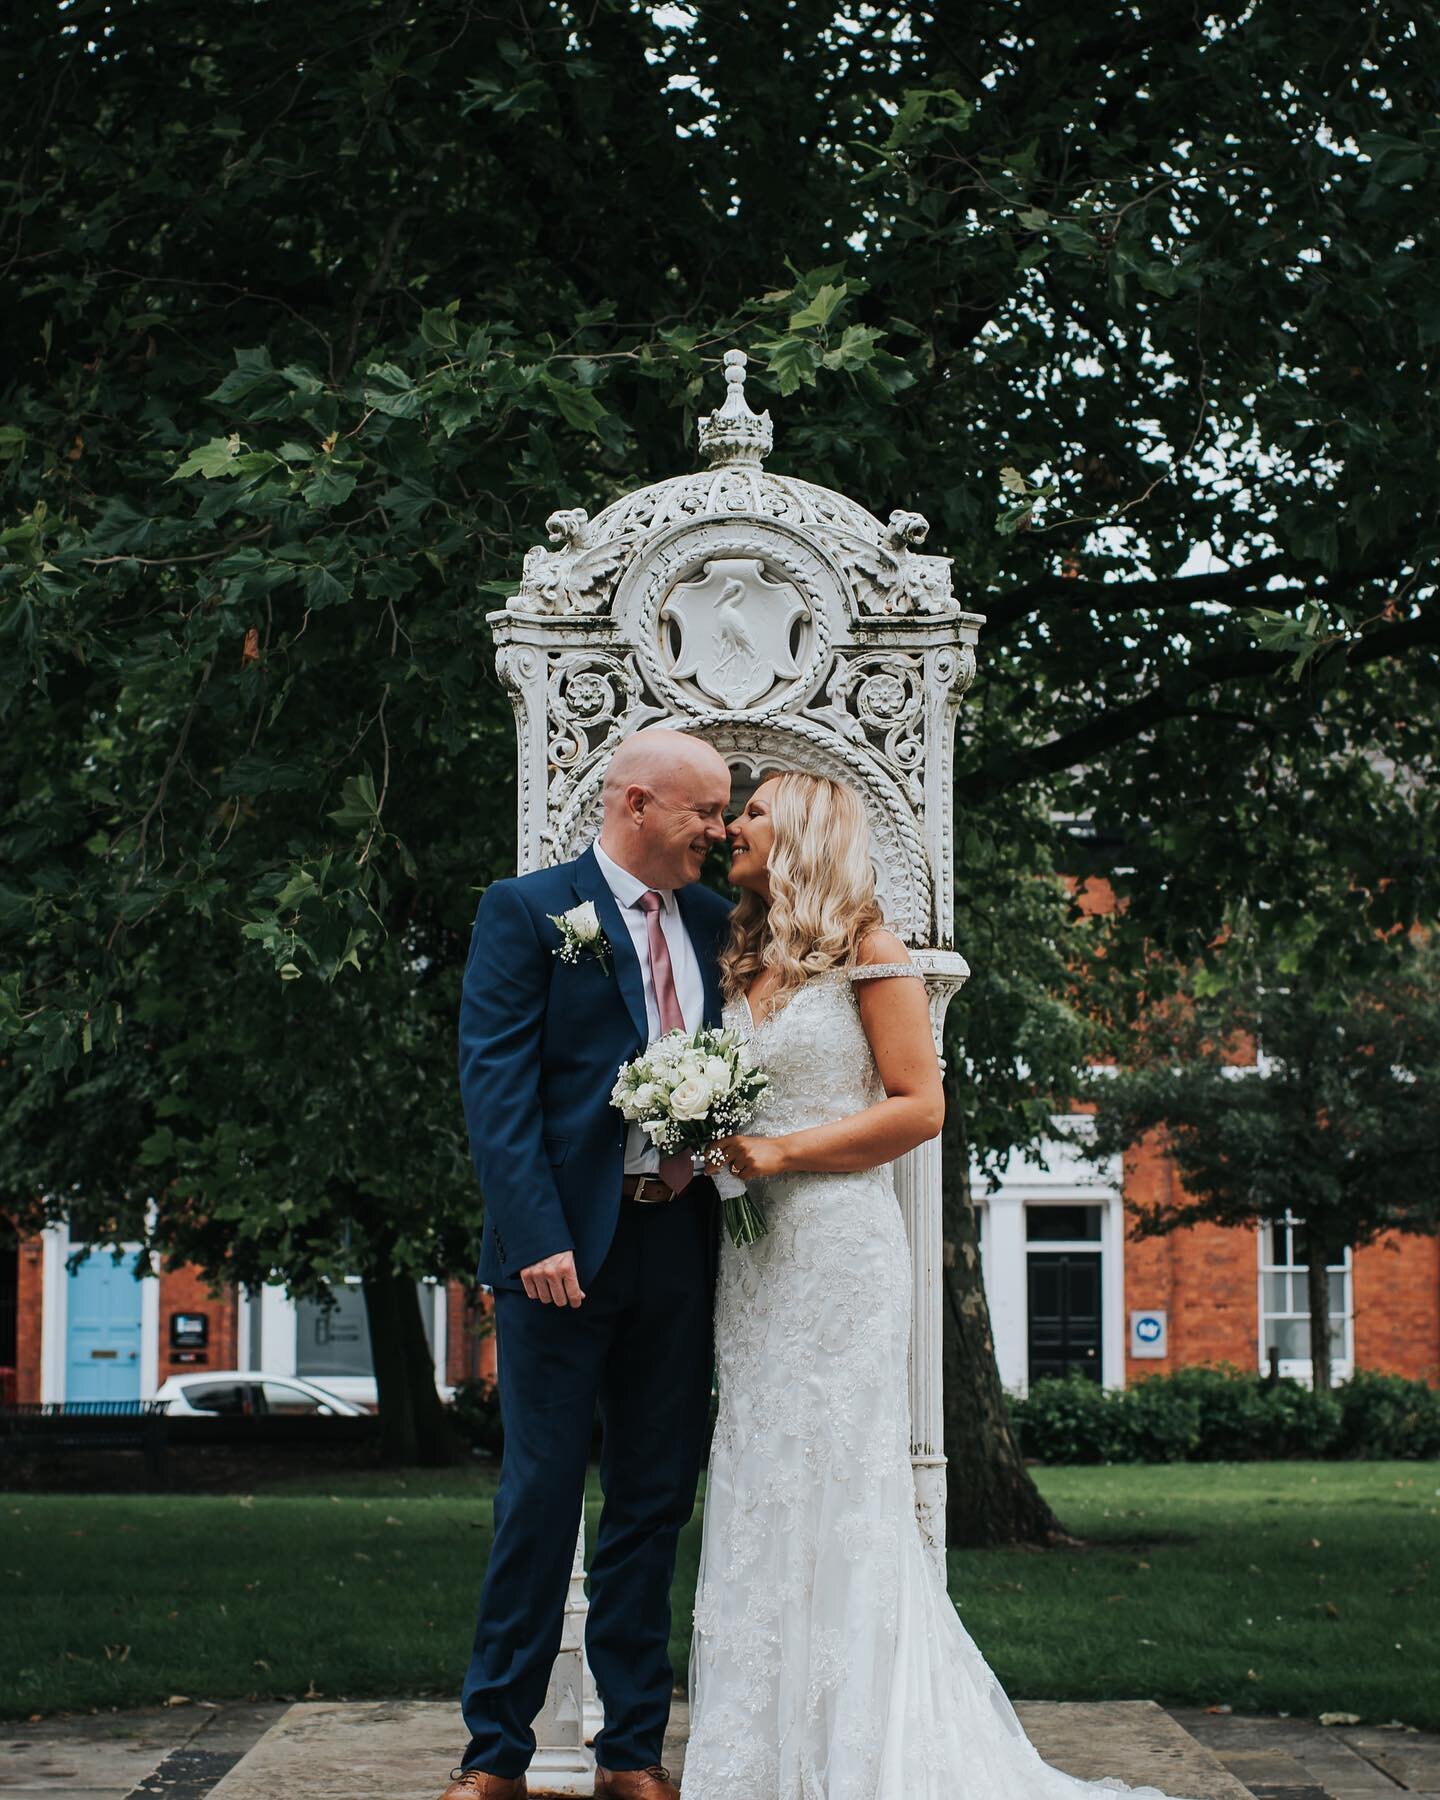 We did it 💍💓 ! Happy happy moments 
&bull;

Planning to get married 2020, 2021 or 2022? Get in touch for booking availability, message me for more details, don&rsquo;t miss out!

&bull;
#bride2021 #imgettingmarried2021
#rusticwedding #2021bride  #2